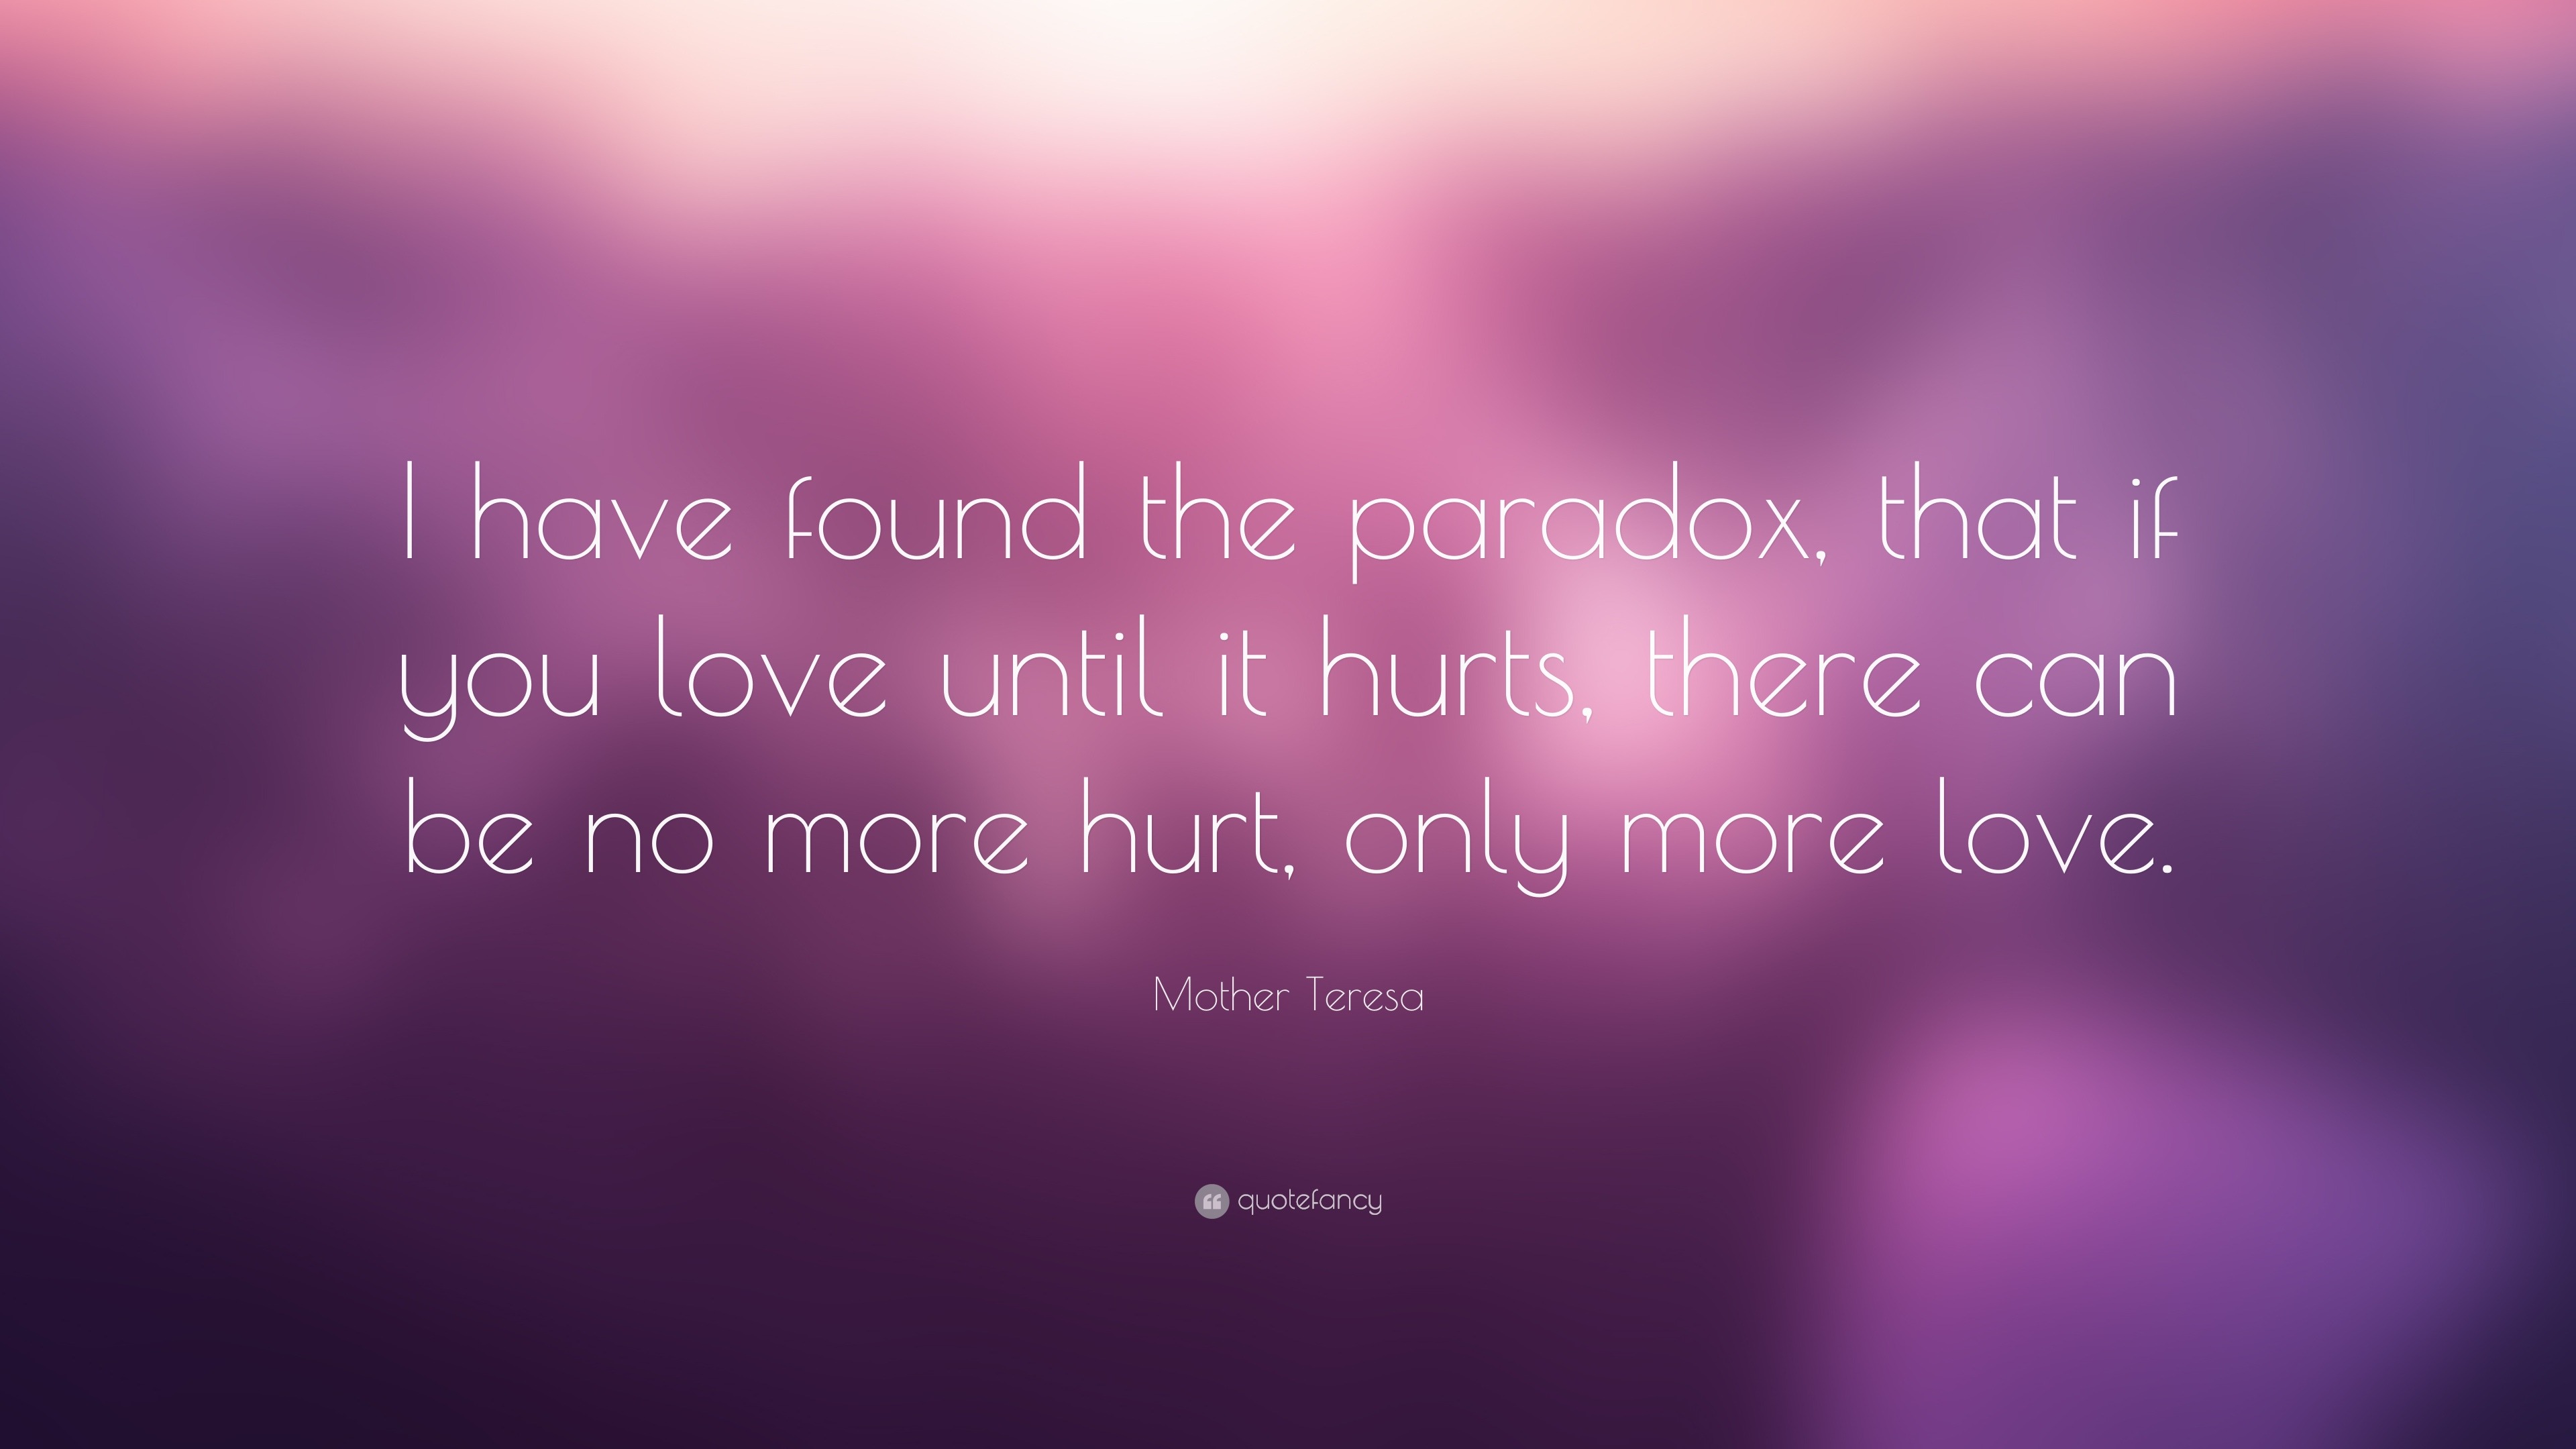 Mother Teresa Quote: “I have found the paradox, that if you love until ...